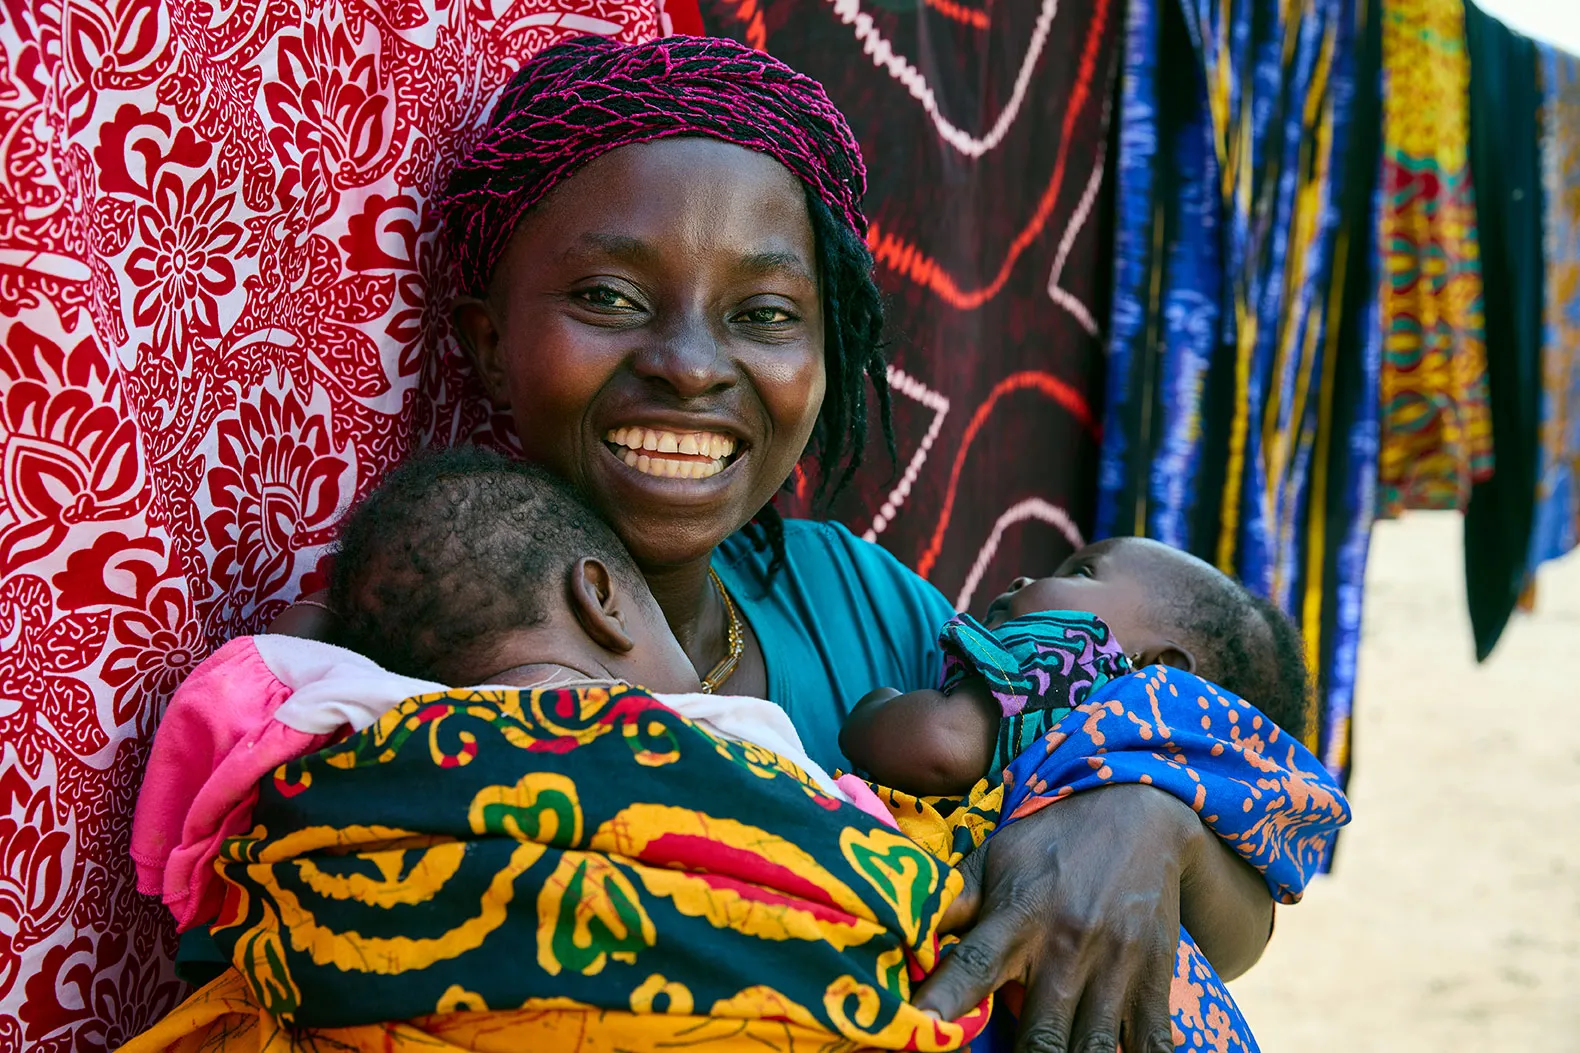 A woman smiles while holding two babies close to her chest.